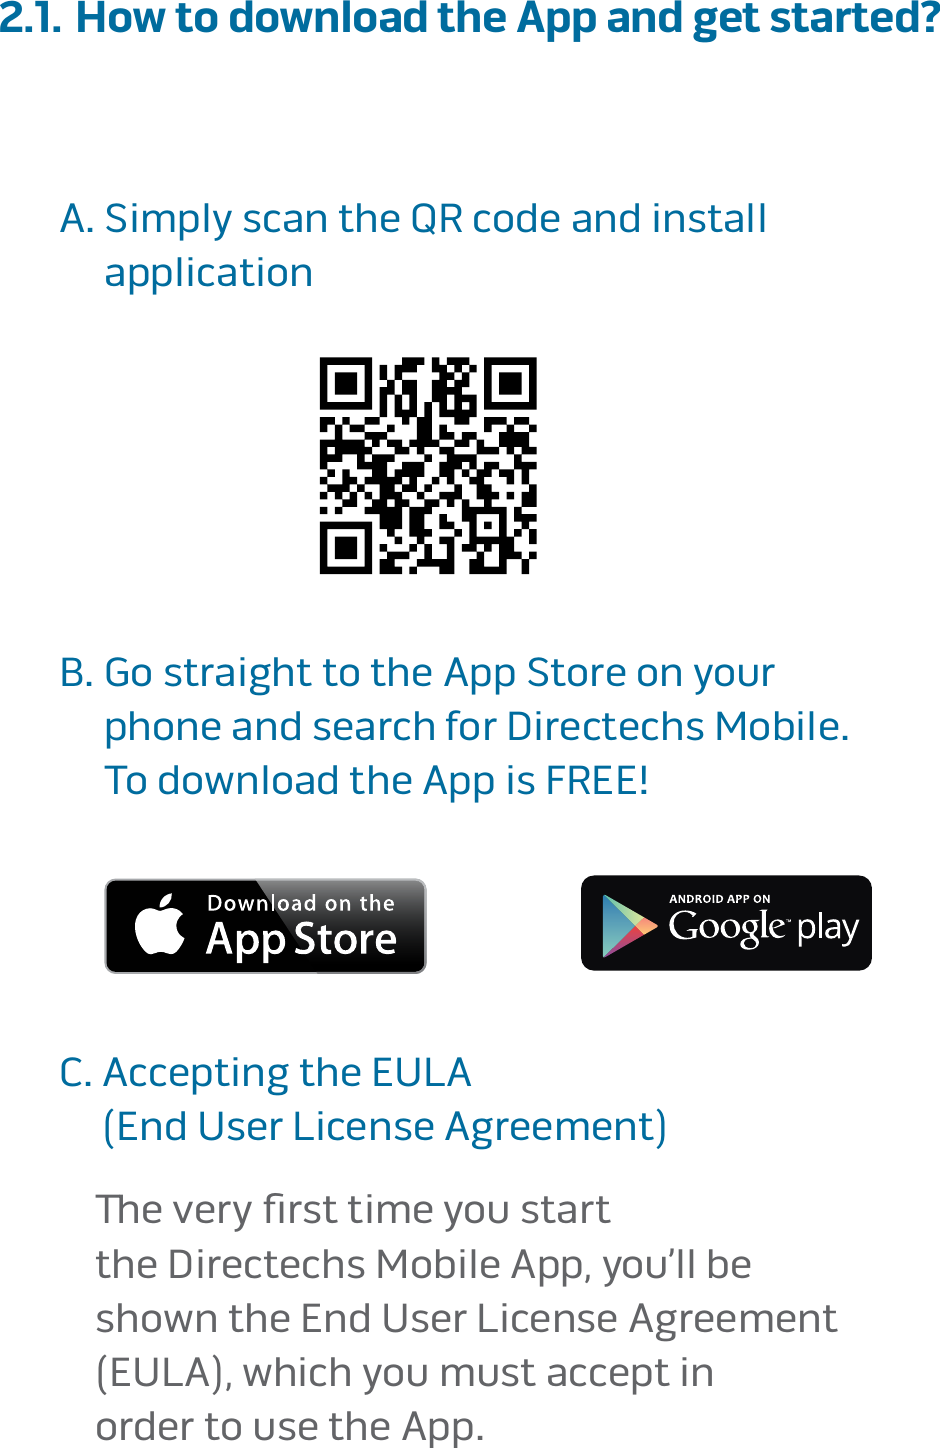 page 92.1. How to download the App and get started?  A�  Simply scan the QR code and install  application     B�  Go straight to the App Store on your  phone and search for Directechs Mobile�  To download the App is FREE!         C�  Accepting the EULA  (End User License Agreement)        e very ﬁrst time you start  the Directechs Mobile App, you’ll be  shown the End User License Agreement  (EULA), which you must accept in  order to use the App� 